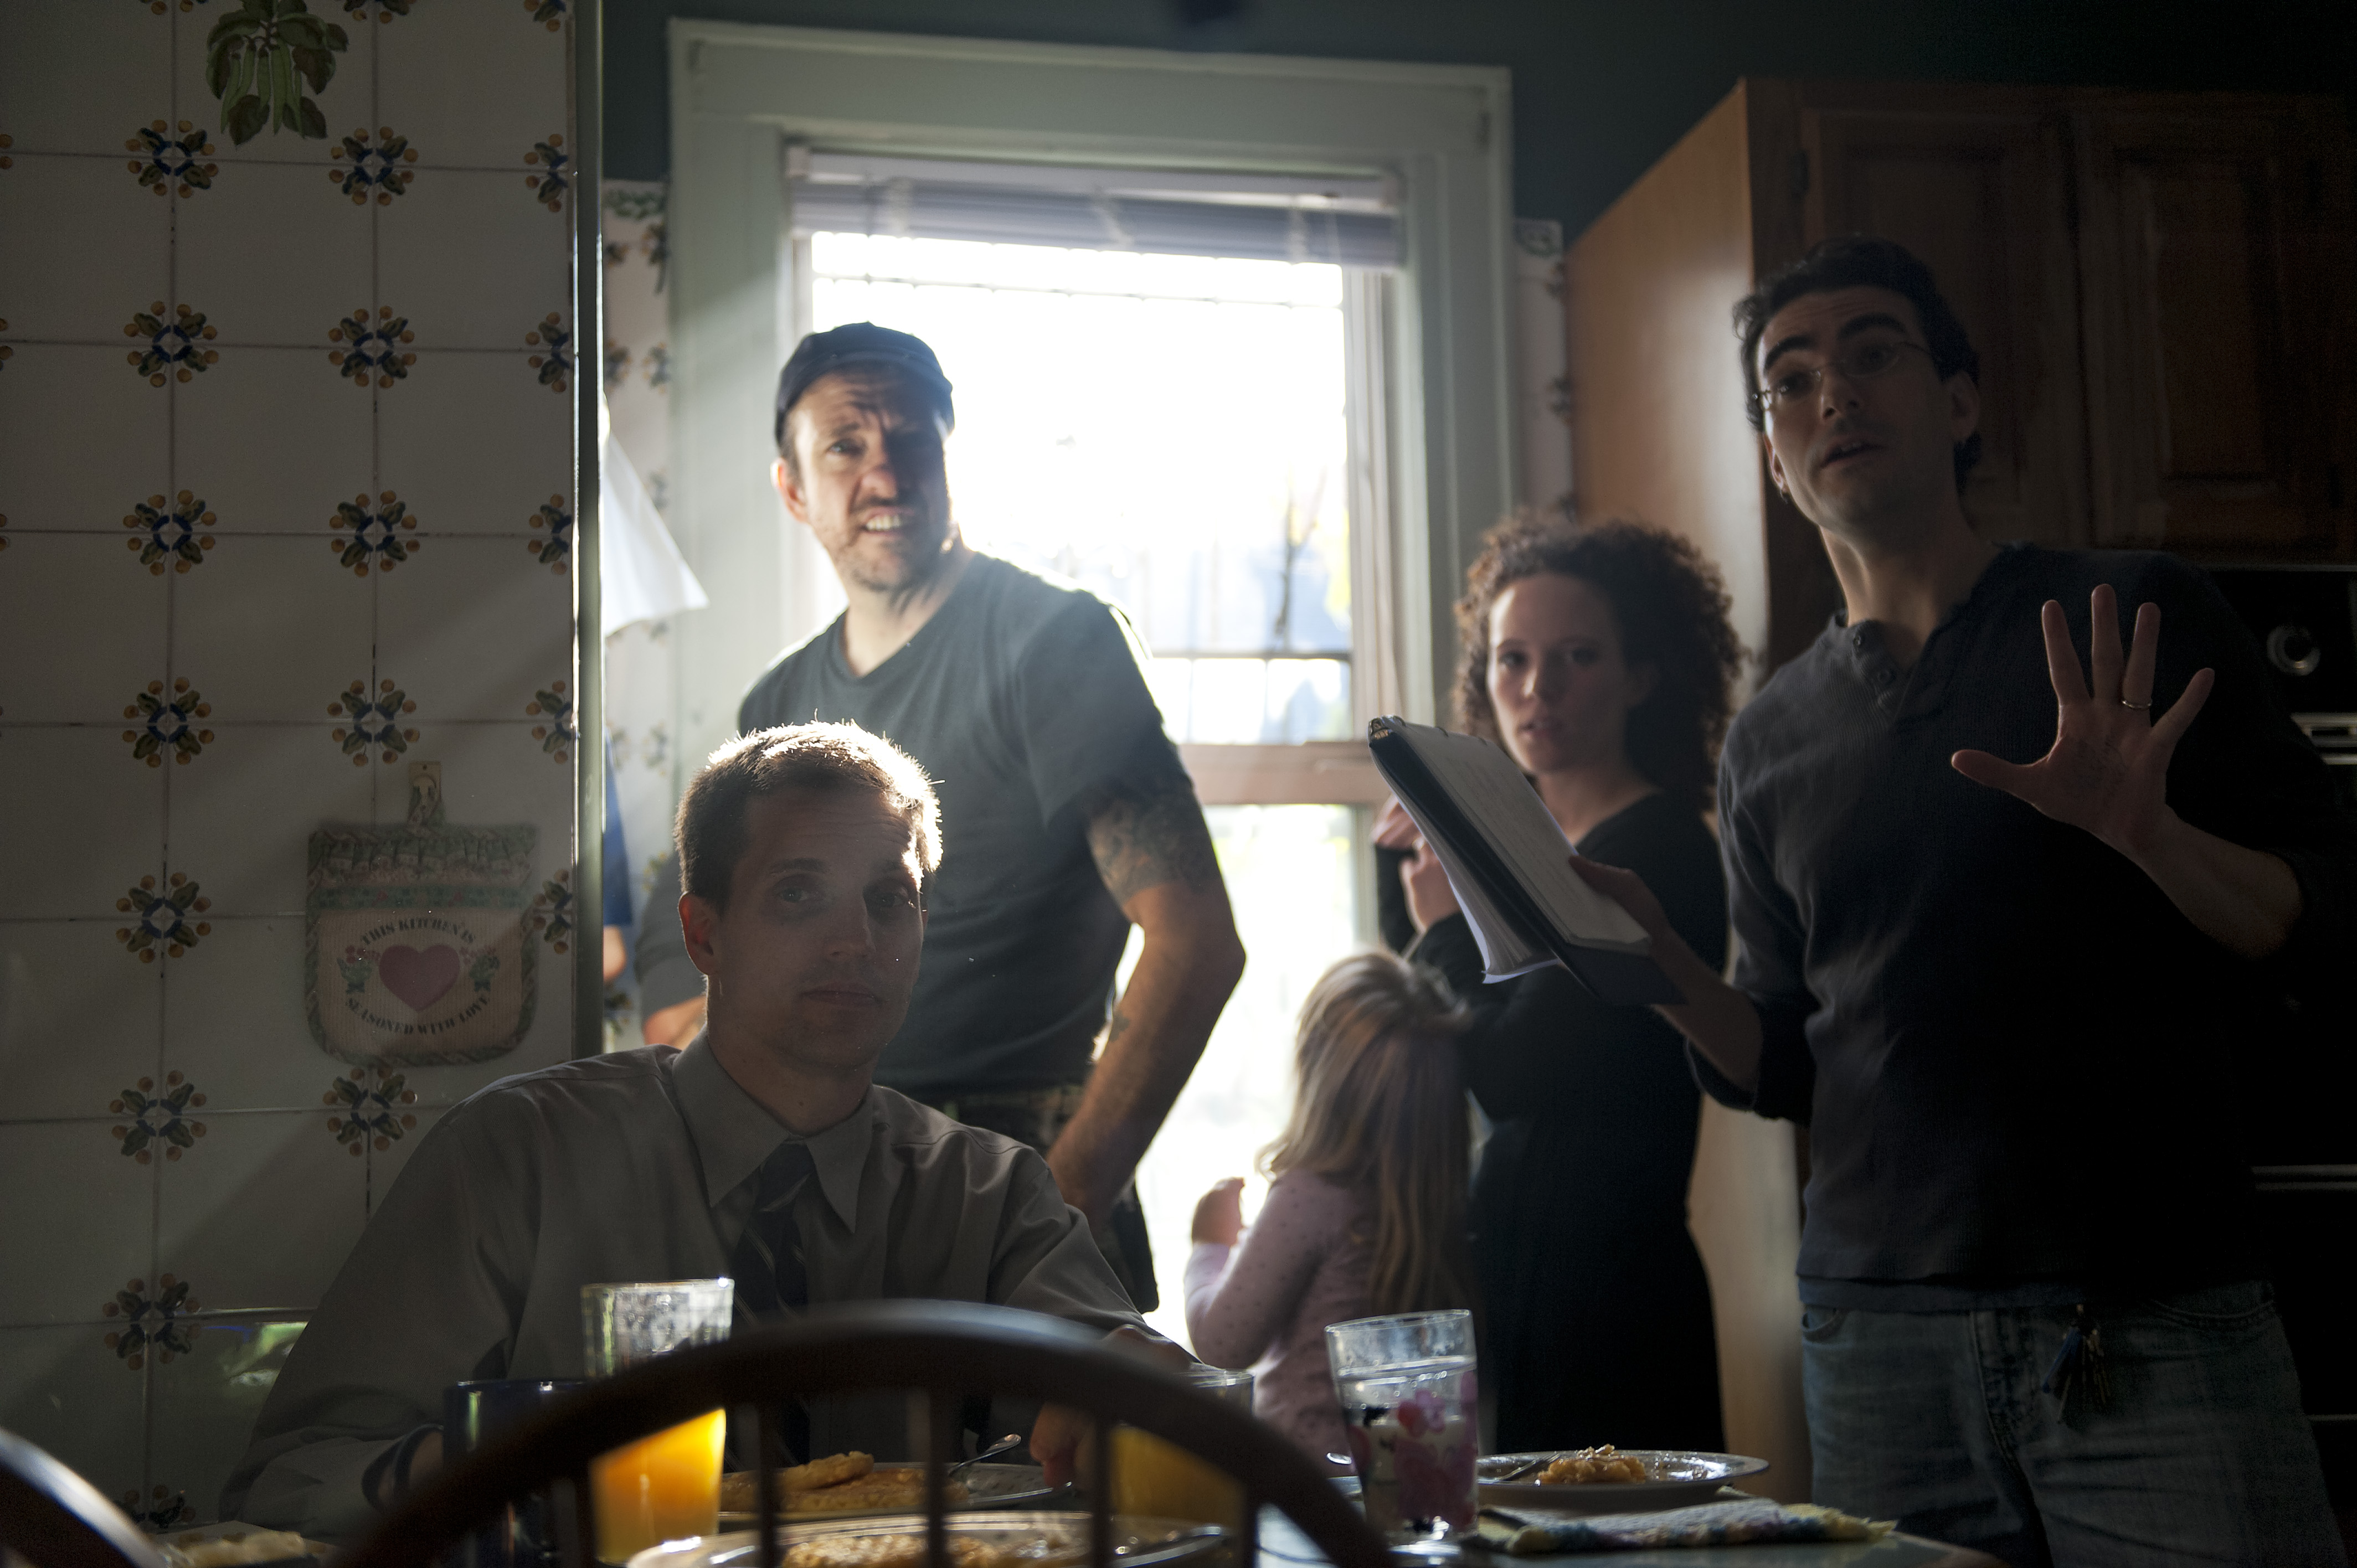 Elias, Jason Vail, James Connelly and Sarah Schoofs in Gut (2012)